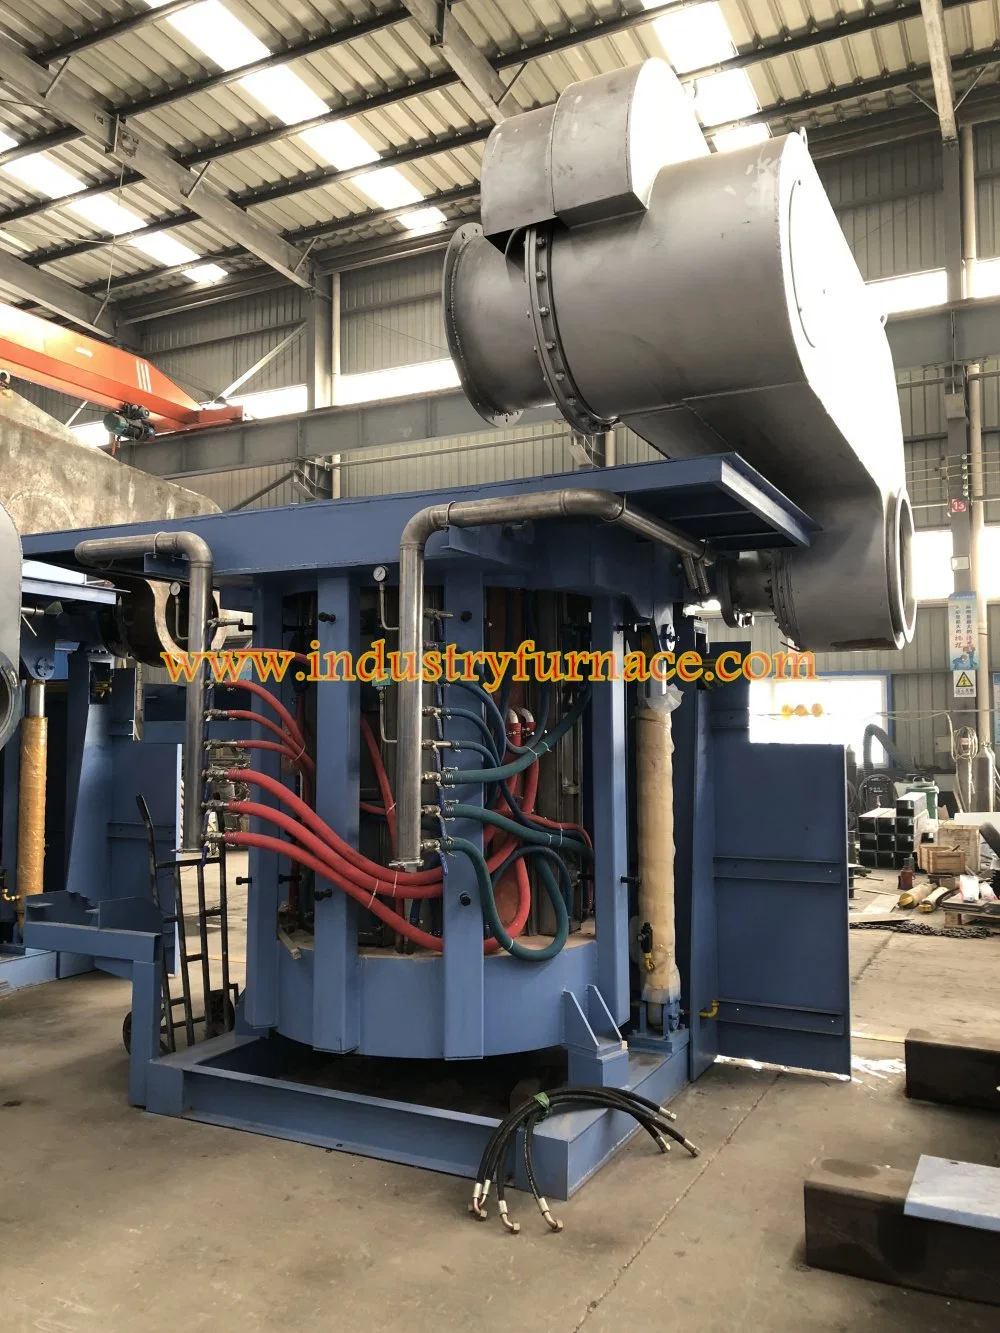 5 Tons Capacity Intermediate Frequency Steel Iron Induction Melting Furnace